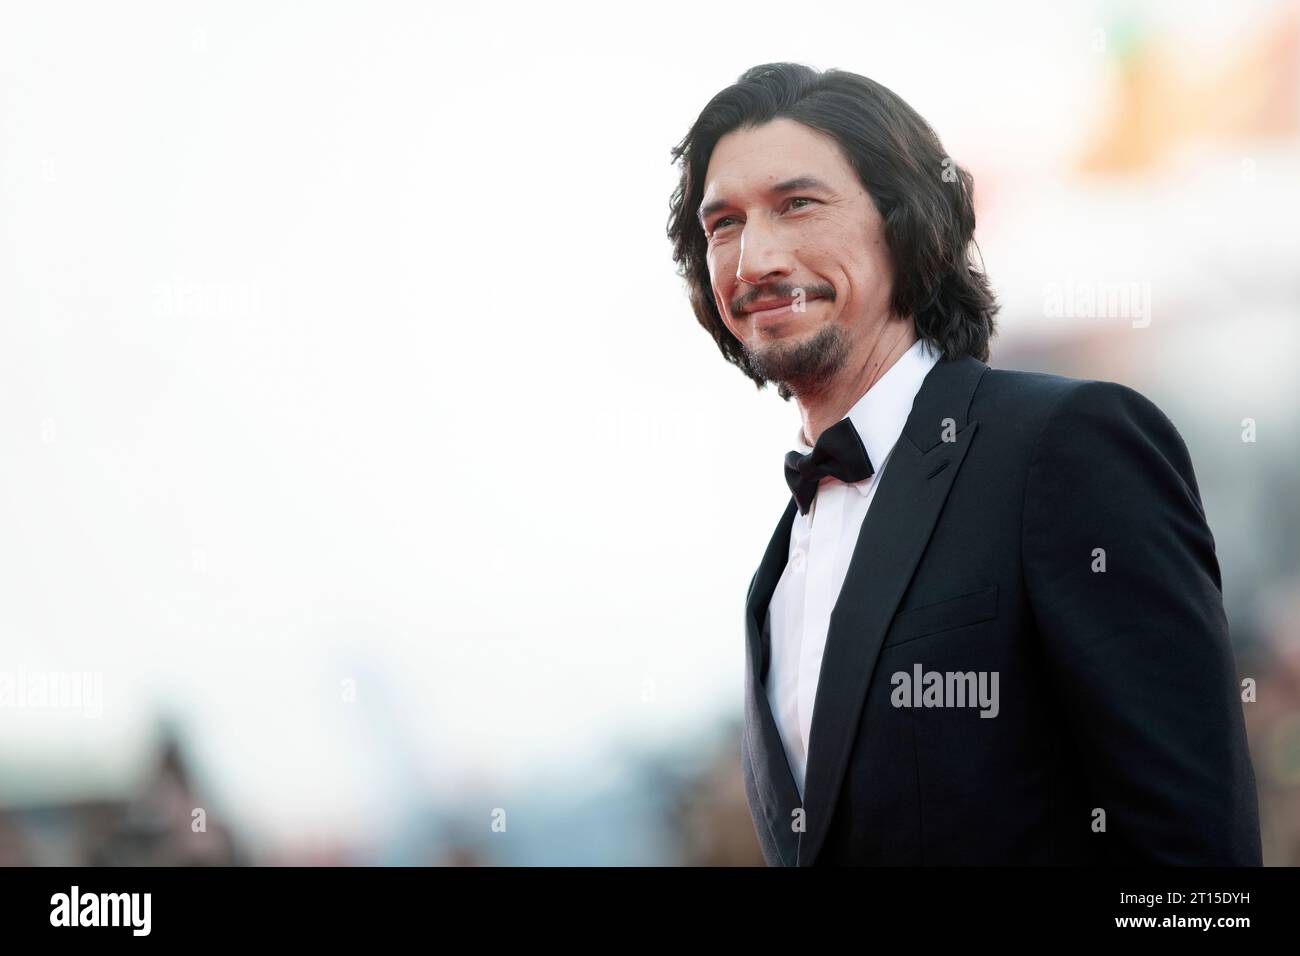 VENICE, ITALY - AUGUST 31: Adam Driver attends the red carpet for the movie 'Ferrari' at the 80th Venice International Film Festival on August 31, 202 Stock Photo